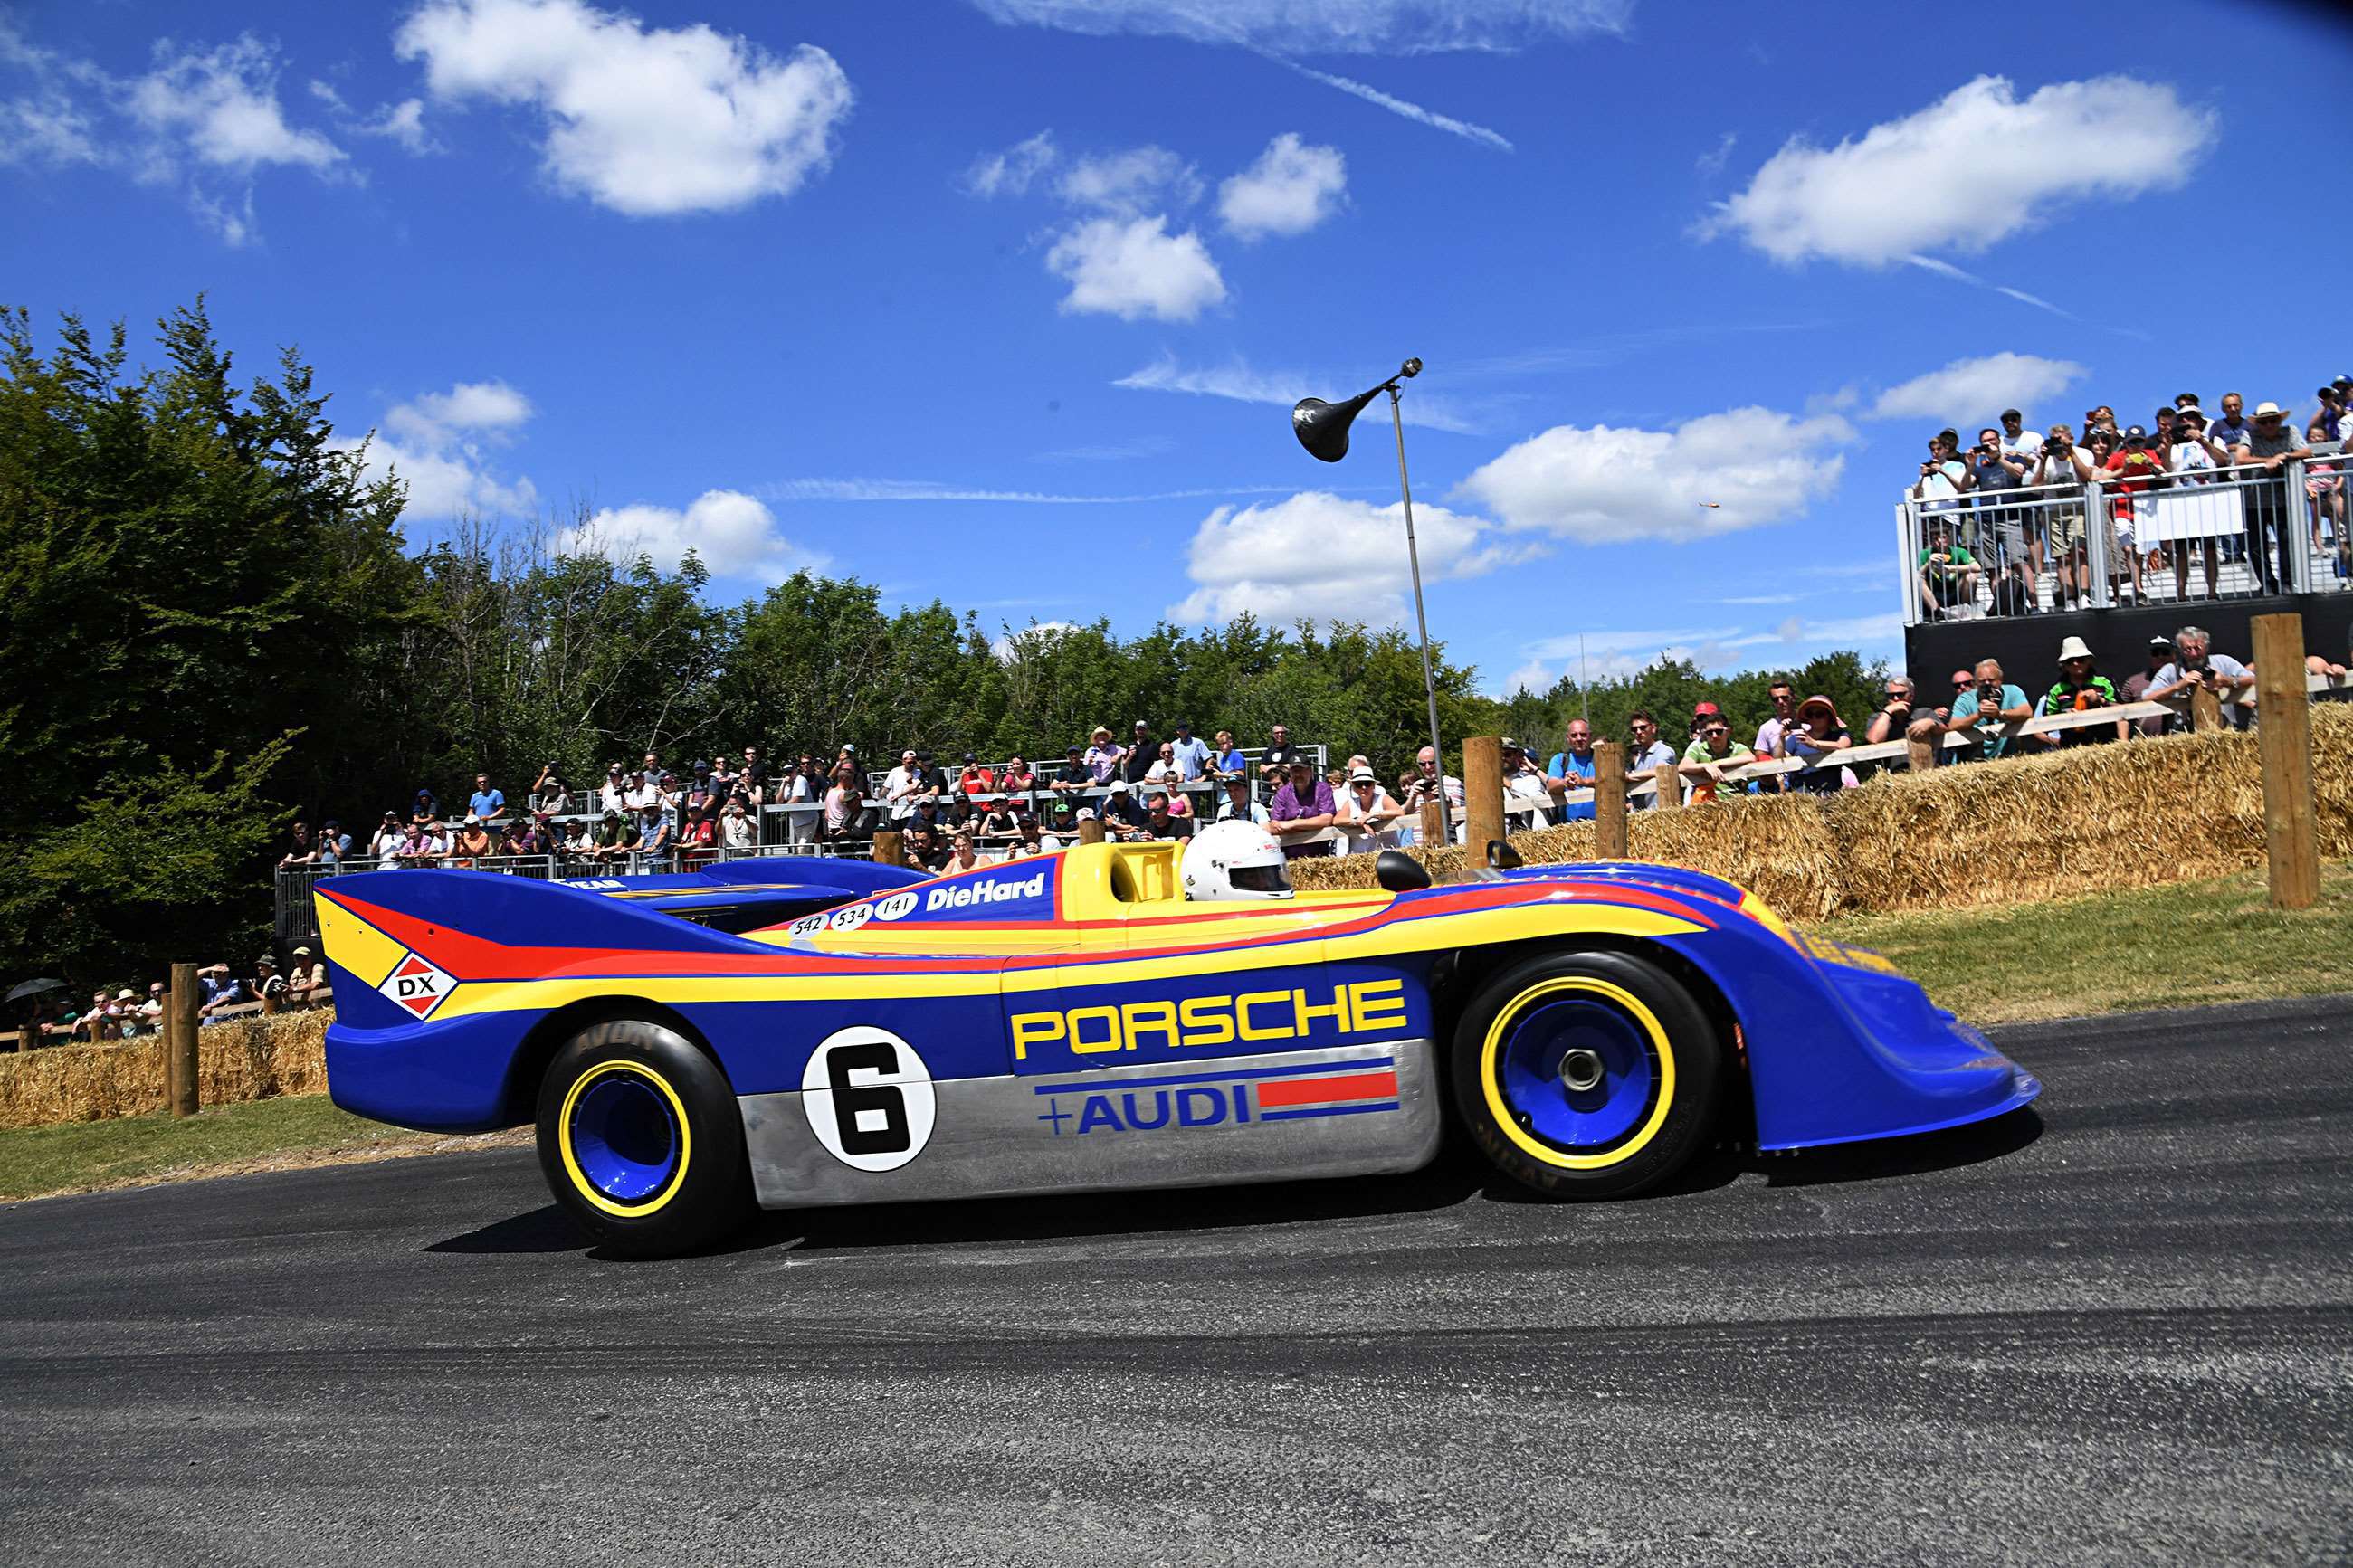 sportscars-to-see-at-the-festival-of-speed-3-porsche-917_30-fos-2016-mi-goodwood-07072021.jpg